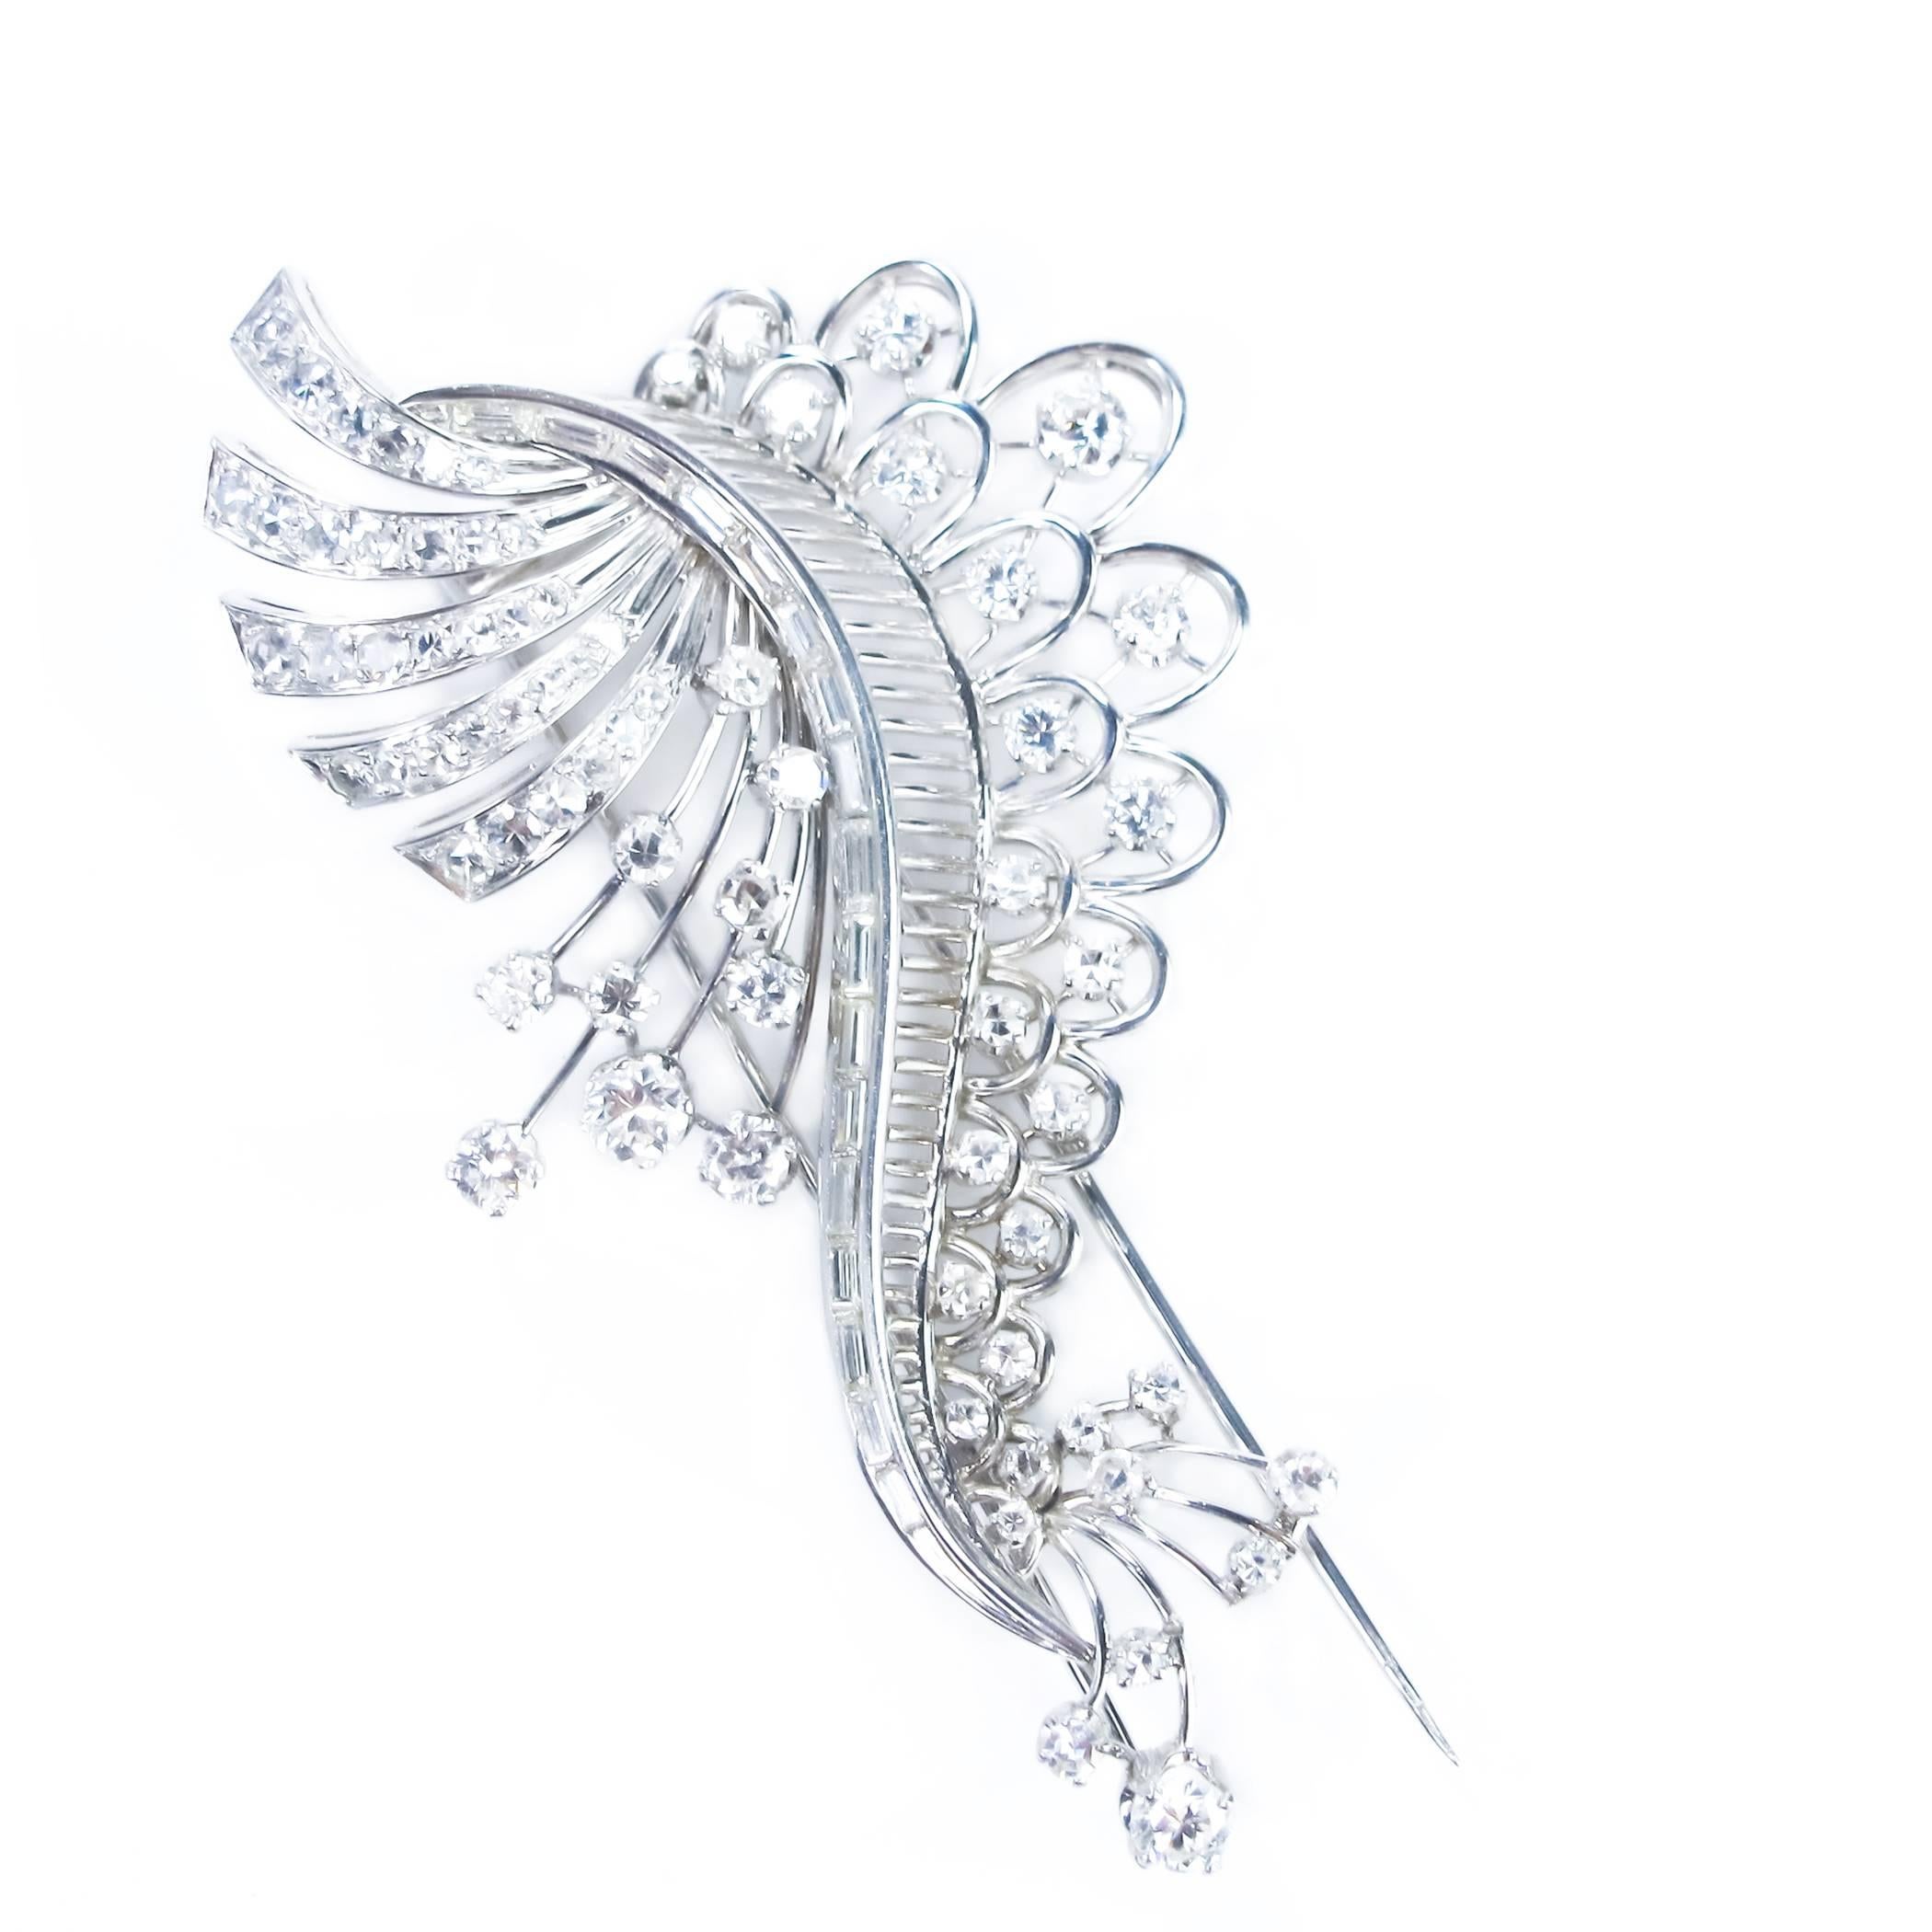 A dramatic 4.01-carat diamond brooch in a beautifully detailed hand crafted Platinum mount. 

There are 90 fancy baguettes, full and single cut rounds in this piece. Mounted on a secure double prong clip

CONDITION:  Excellent with no damage to